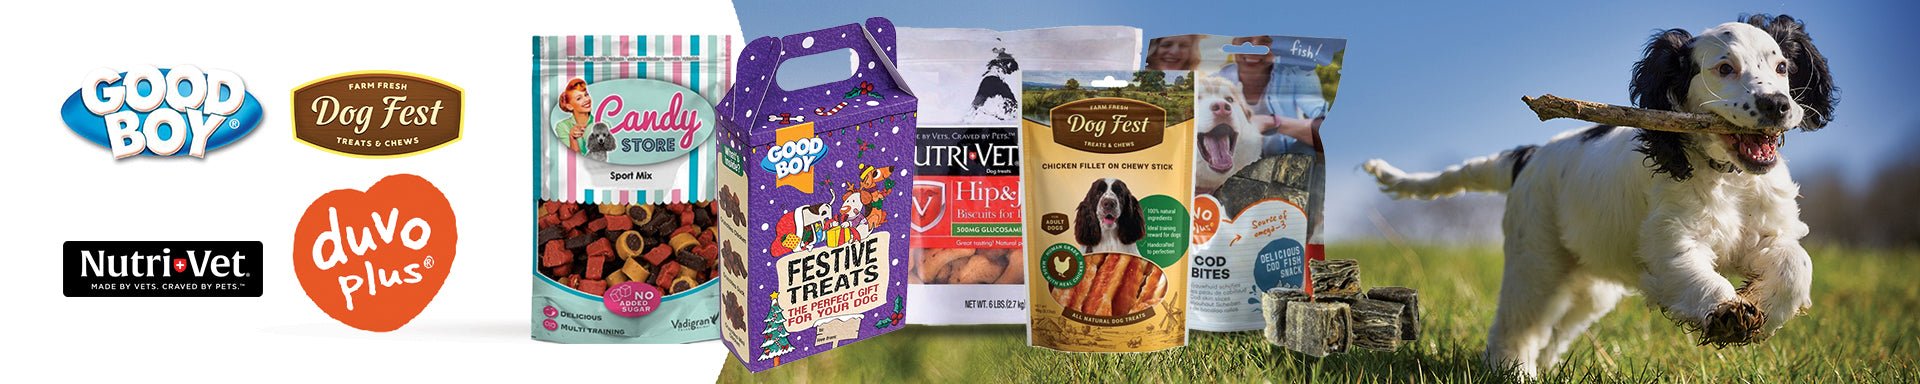 Jerky Dog Treats - High-Protein Snacks for Active Dogs I Free Shipping